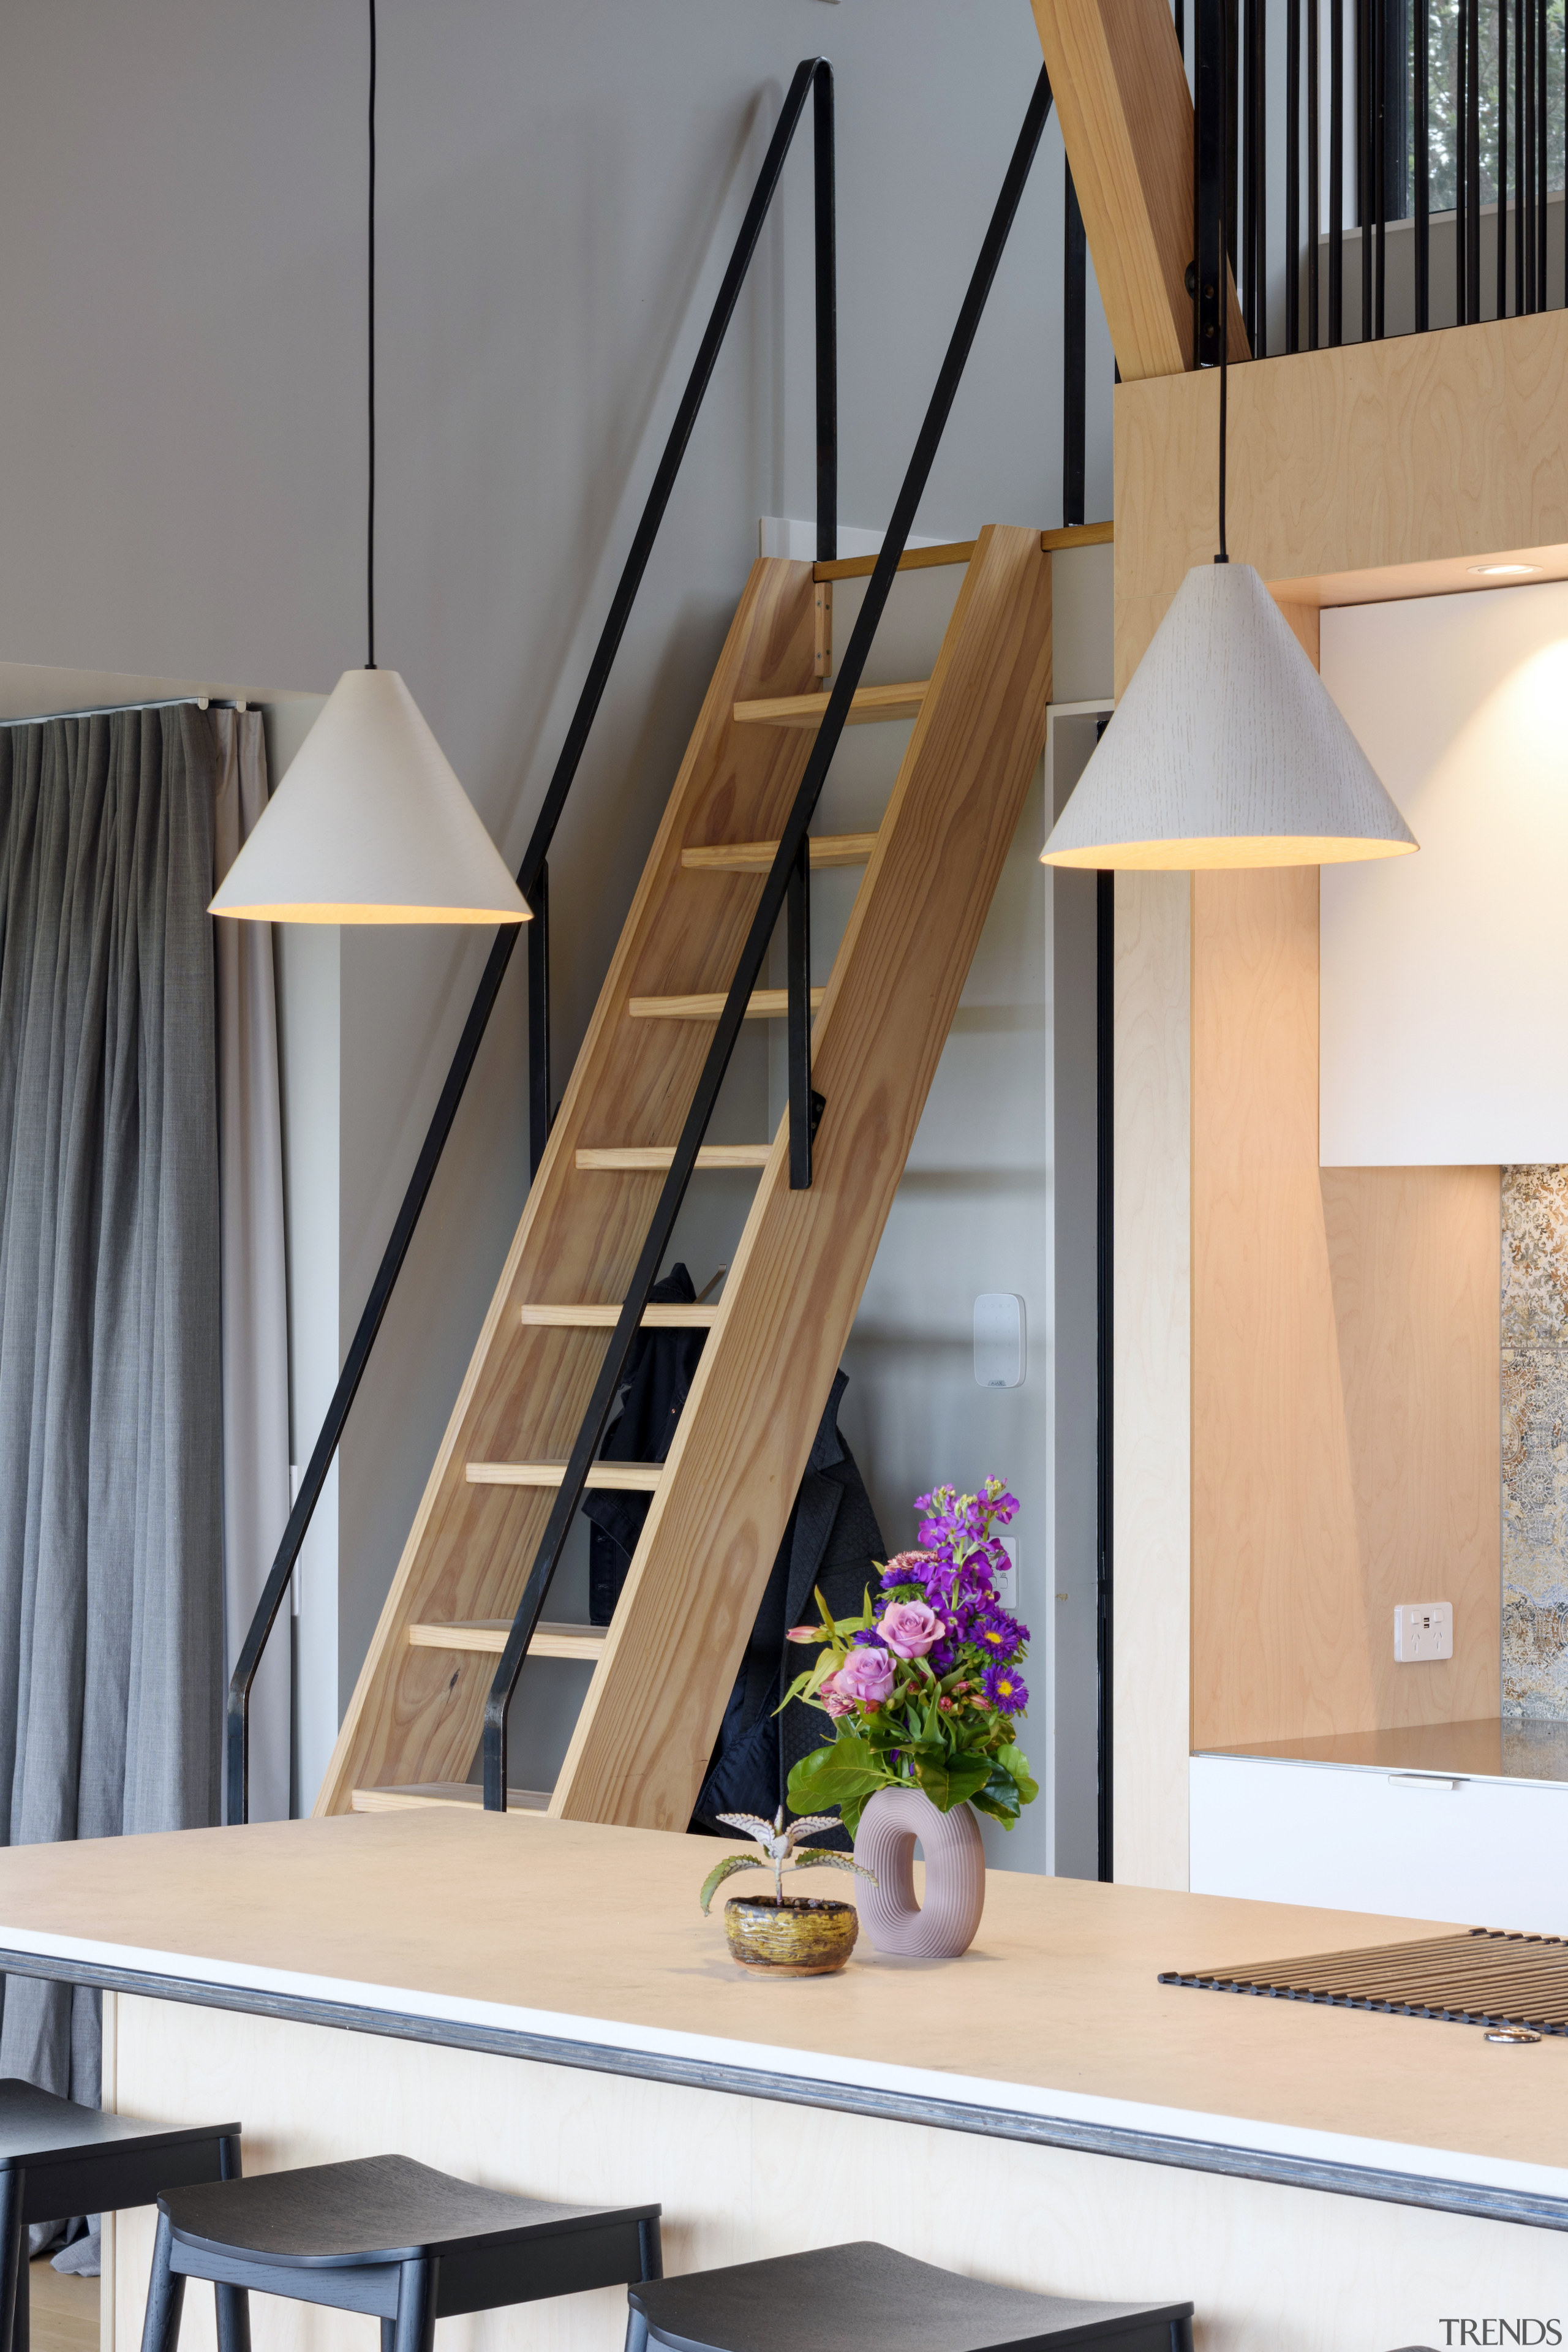 A stylish wood stair ladder leads to the 